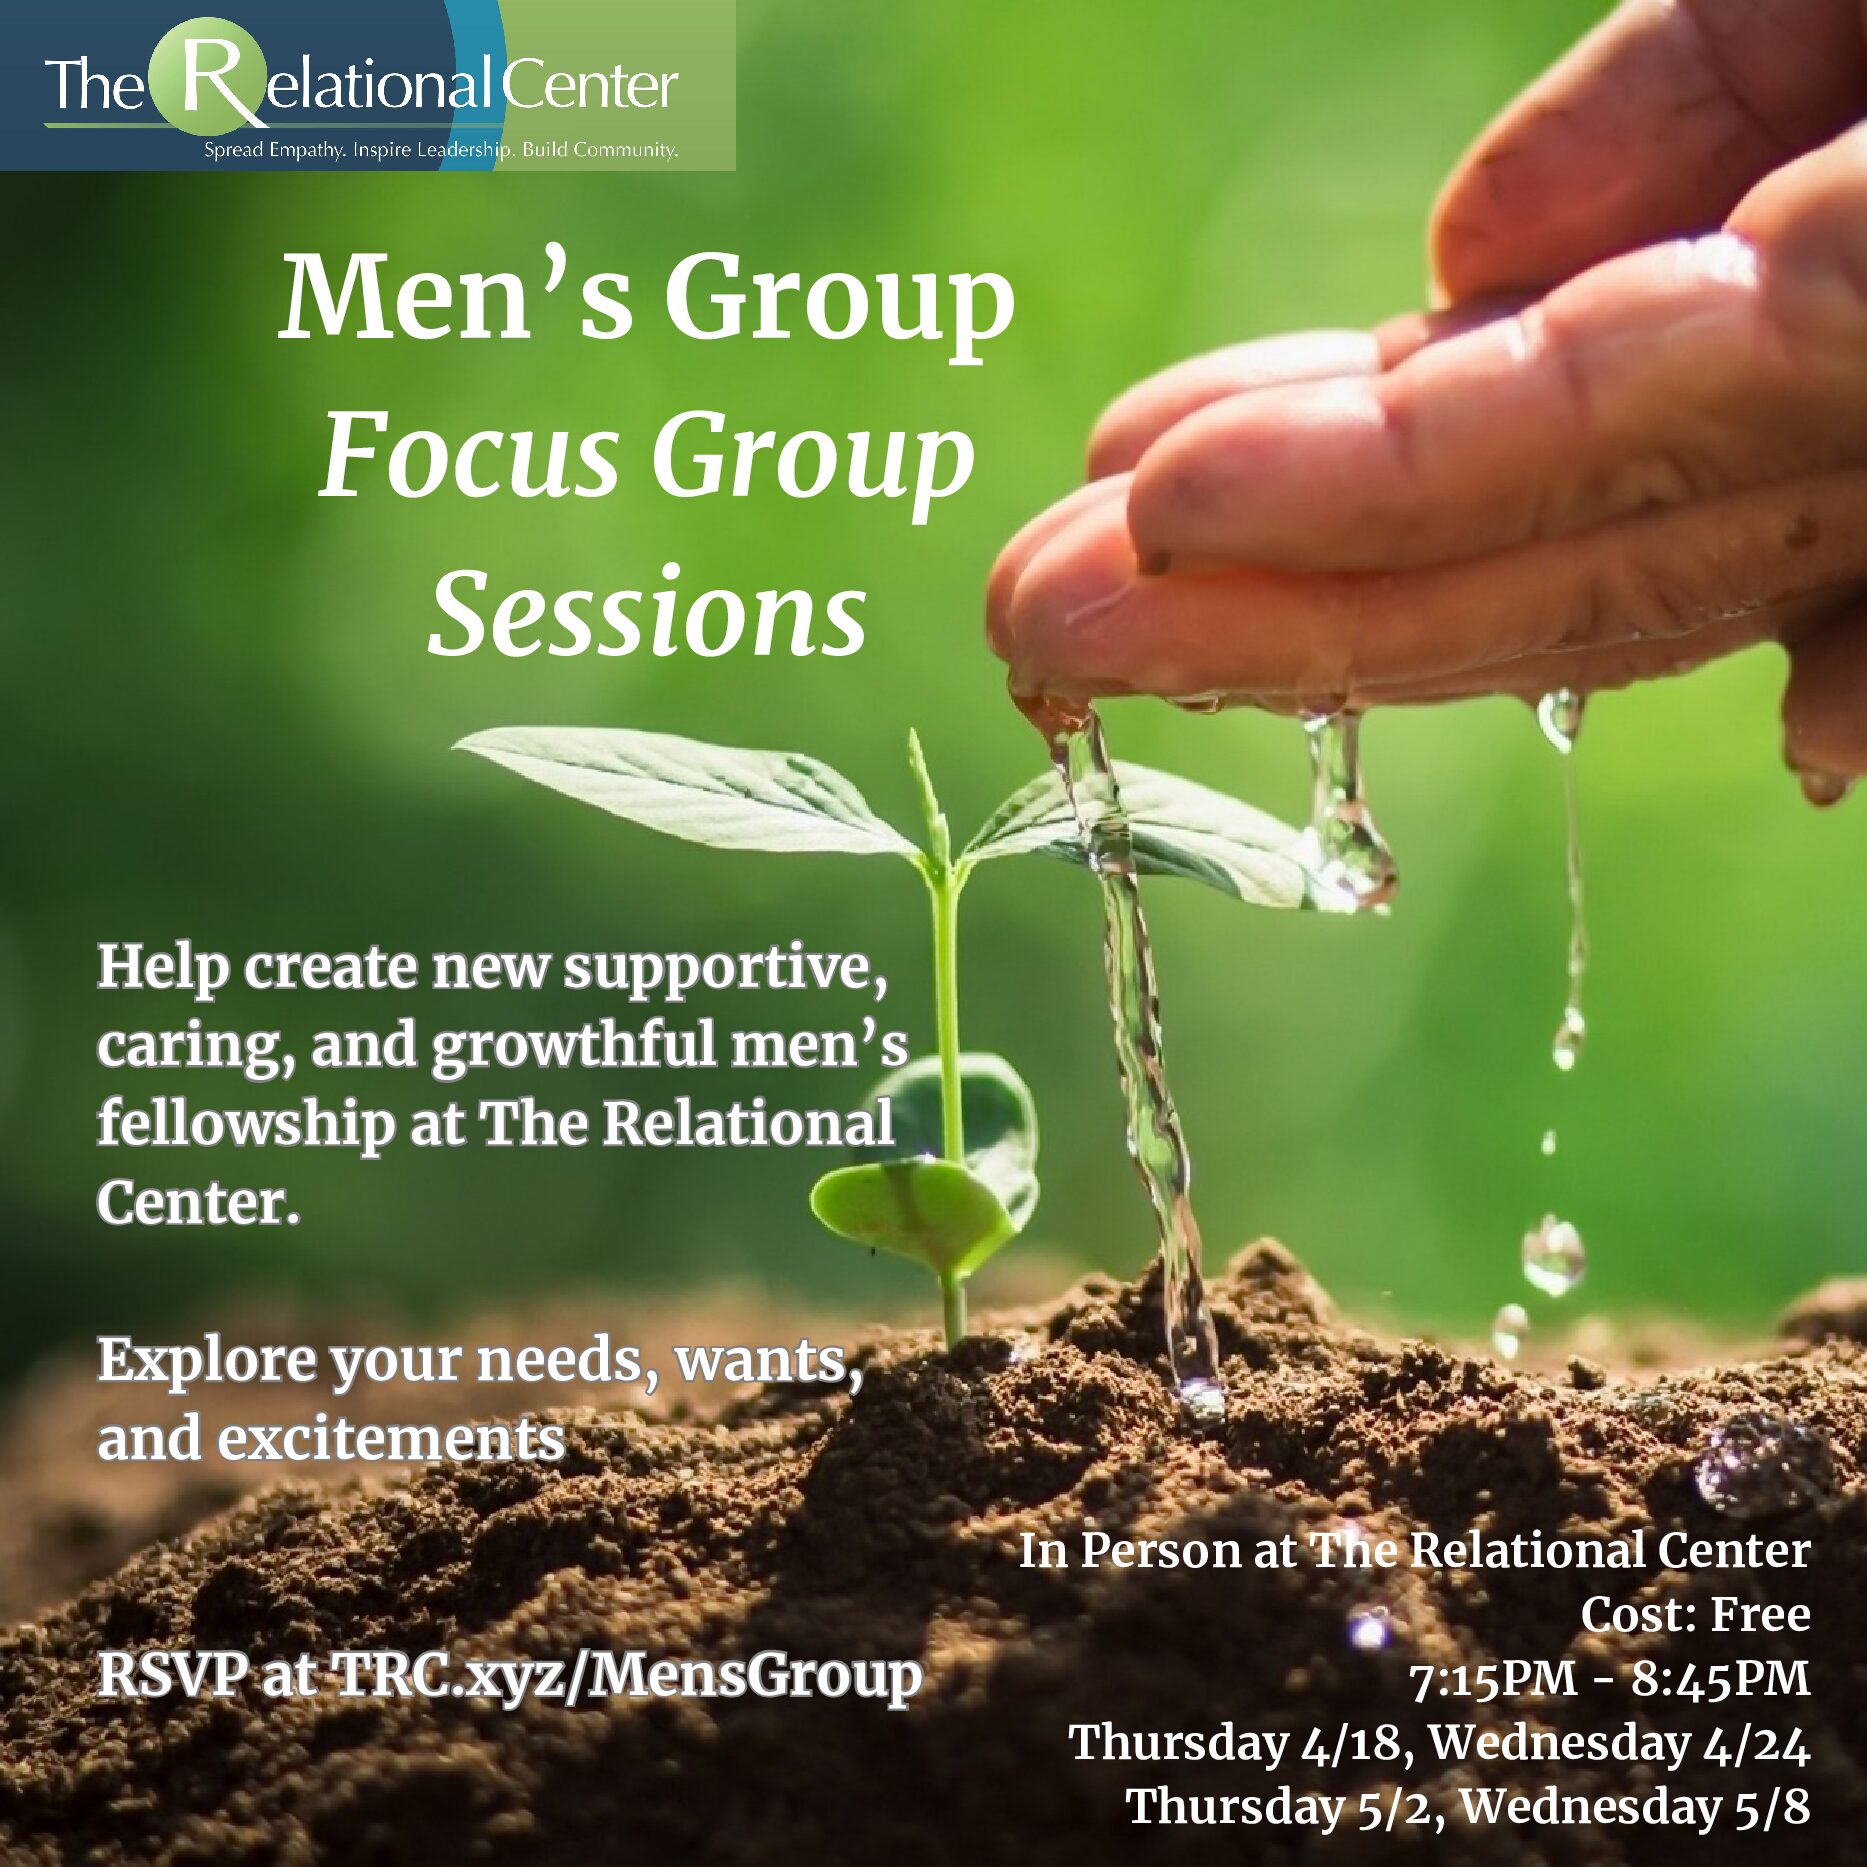 Men's Group Focus Group Sessions